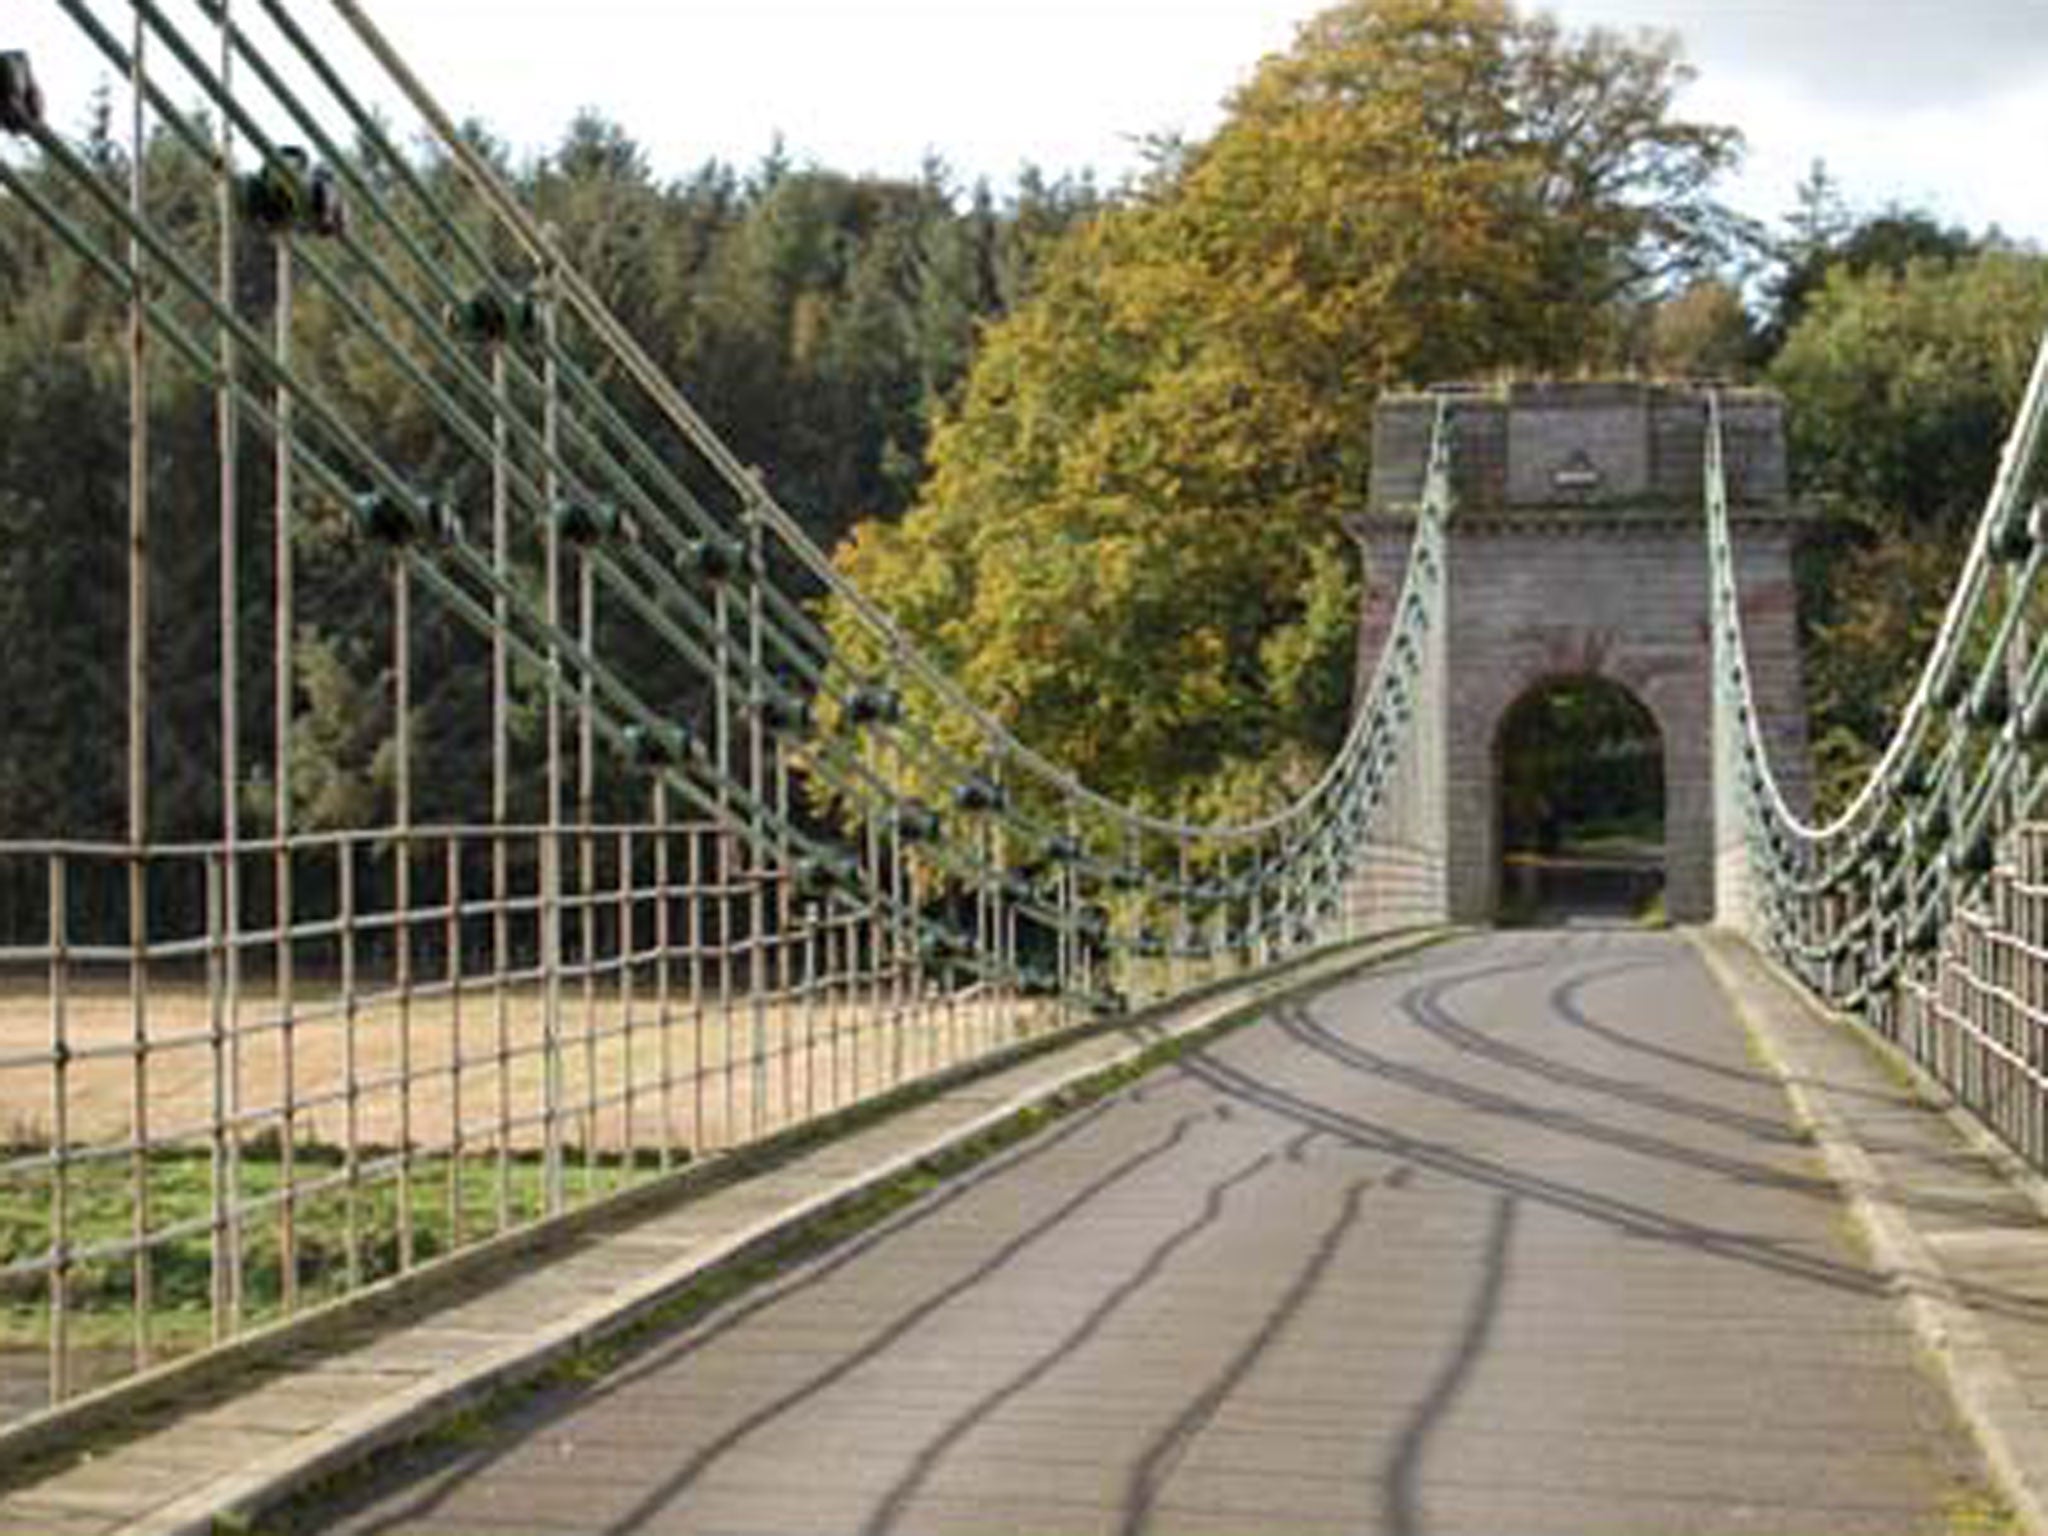 The Union Chain Bridge, Europe’s oldest surviving iron chain suspension bridge, has welcomed visitors to either Scotland or England since 1820